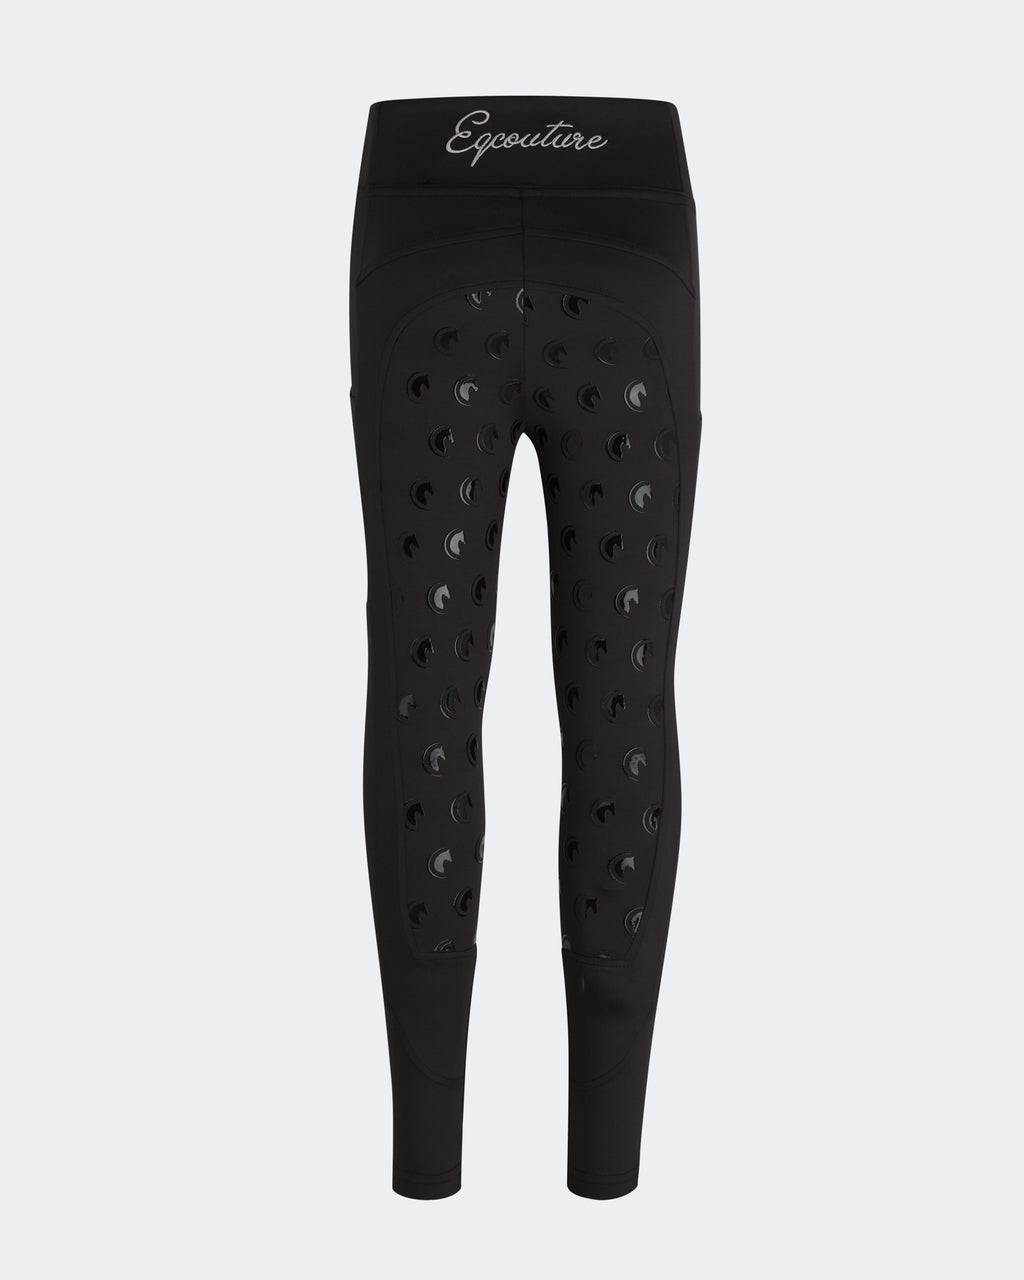 Horse Riding Leggings/Tights with phone pockets - Eqcouture